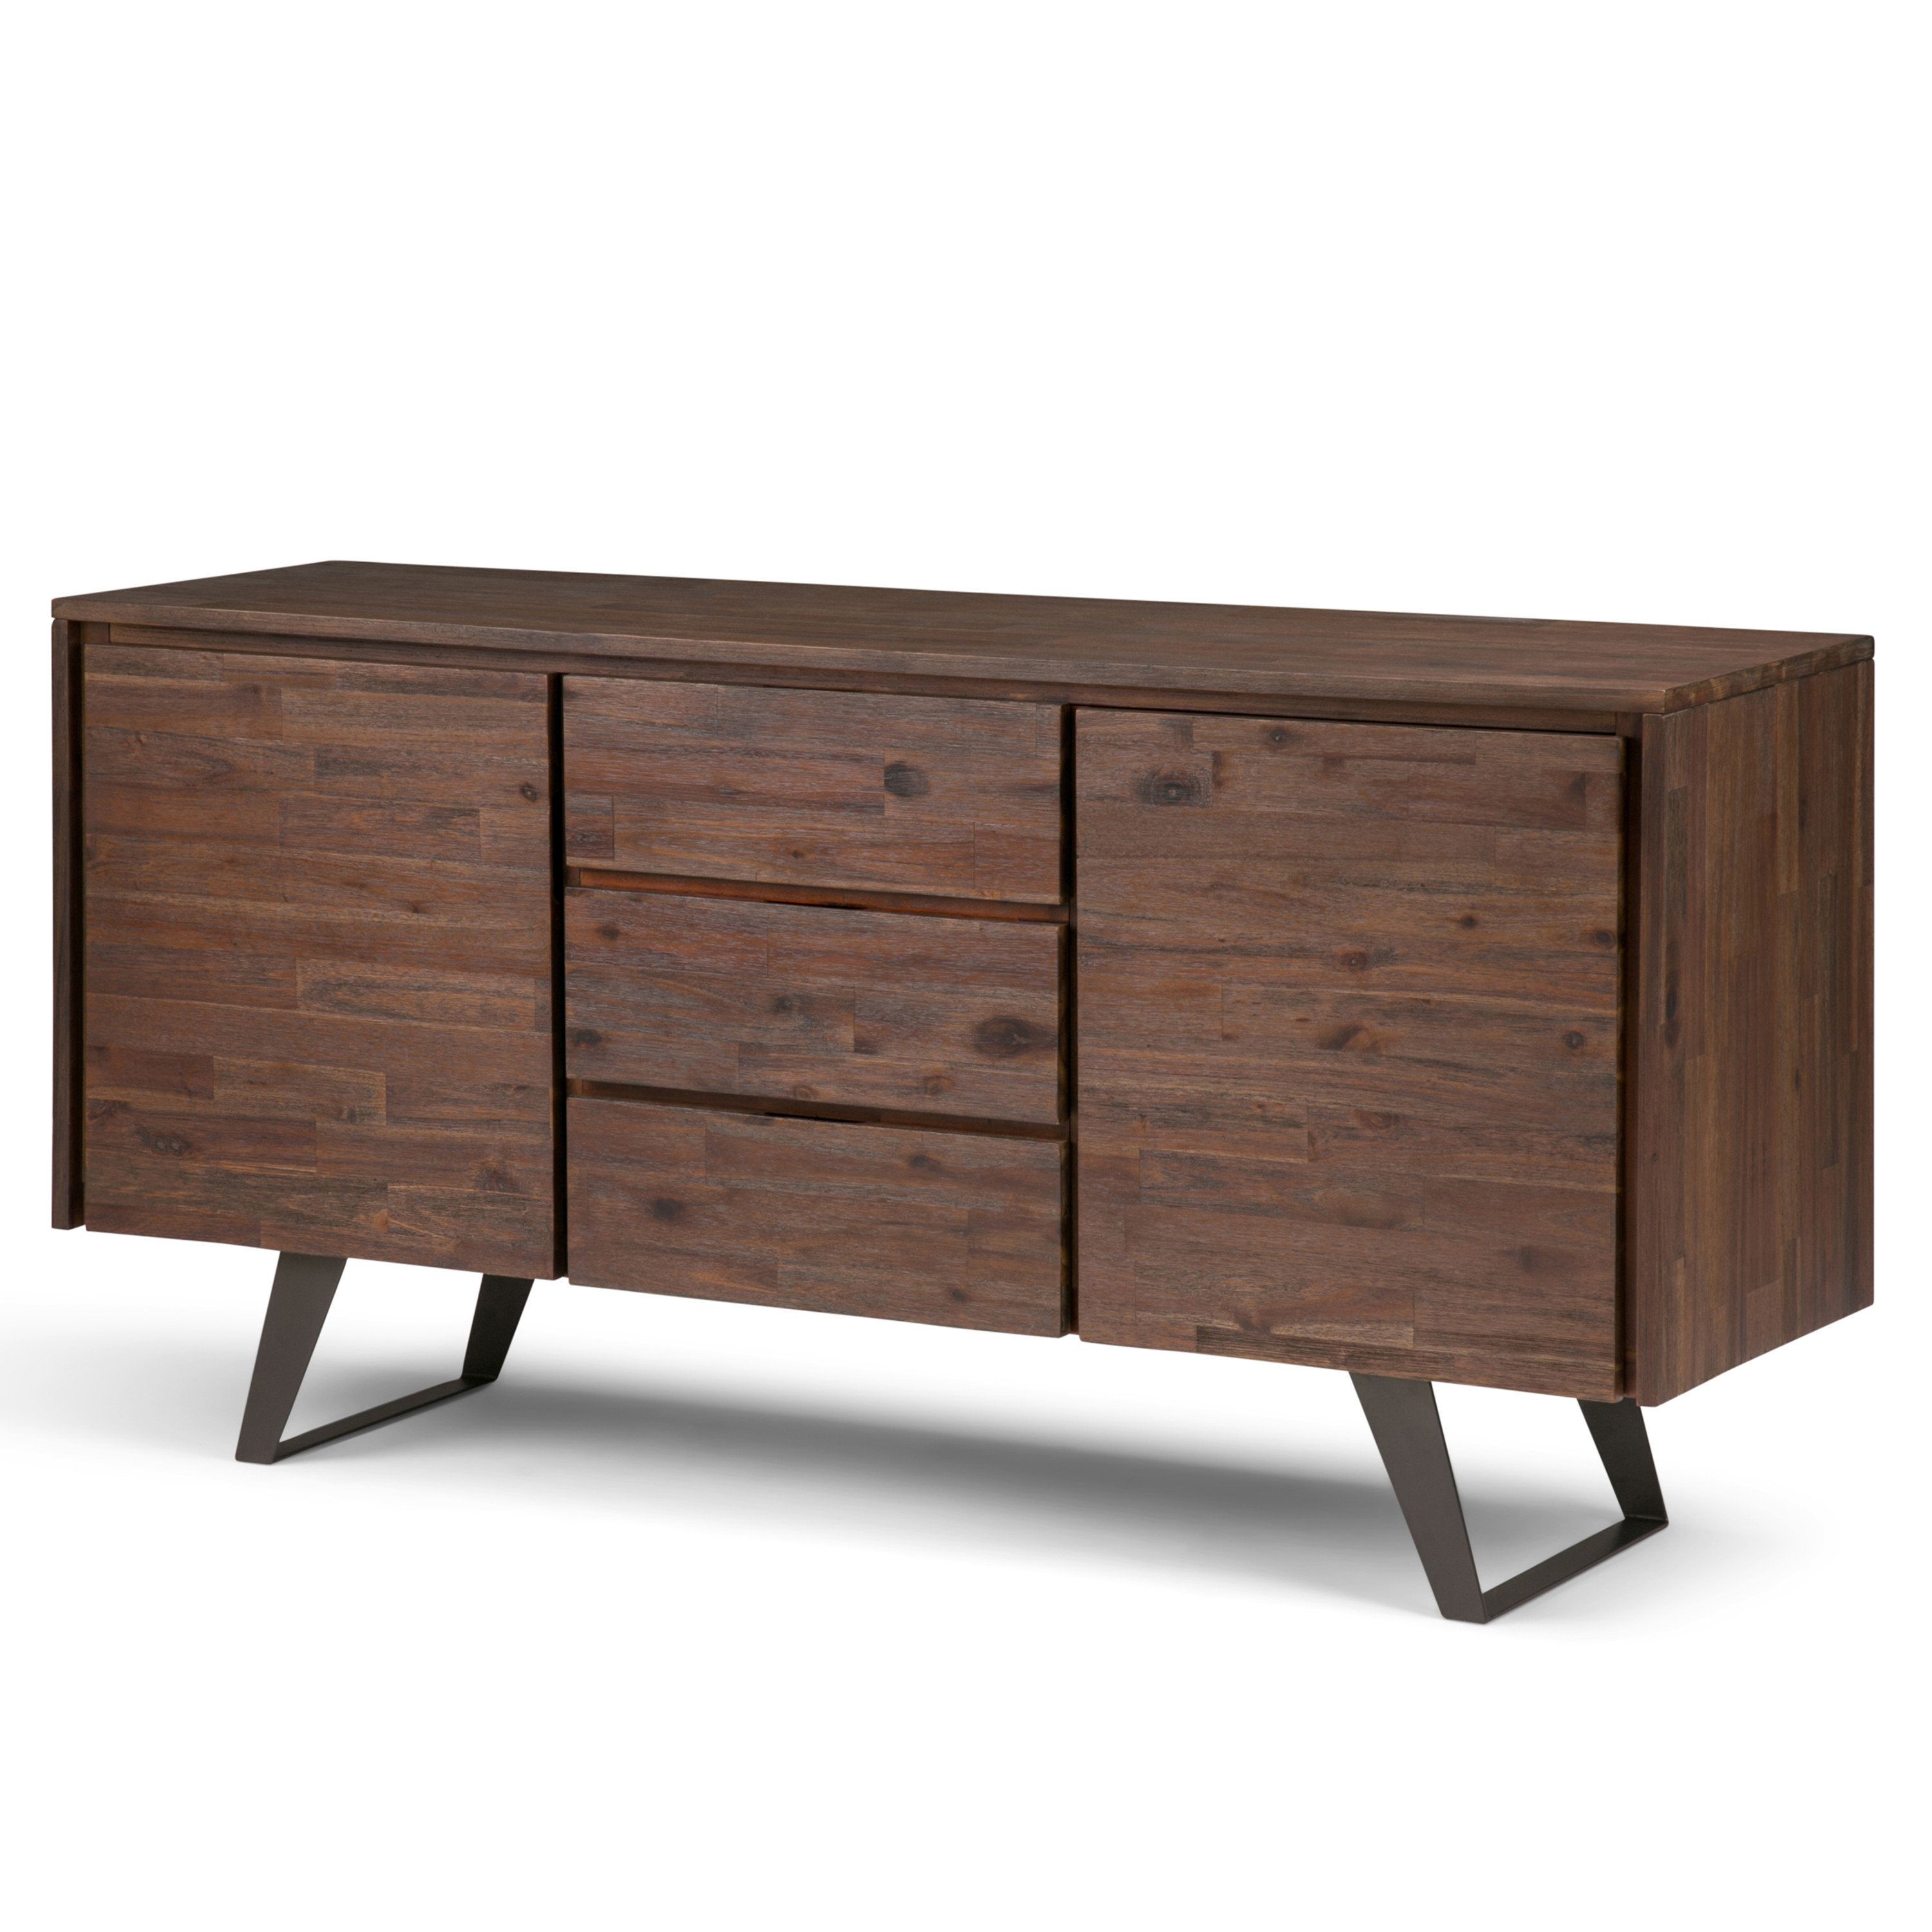 Modern Cabinet Equipped Mid Century Sideboards + Buffets For Contemporary Wooden Buffets With One Side Door Storage Cabinets And Two Drawers (View 5 of 20)